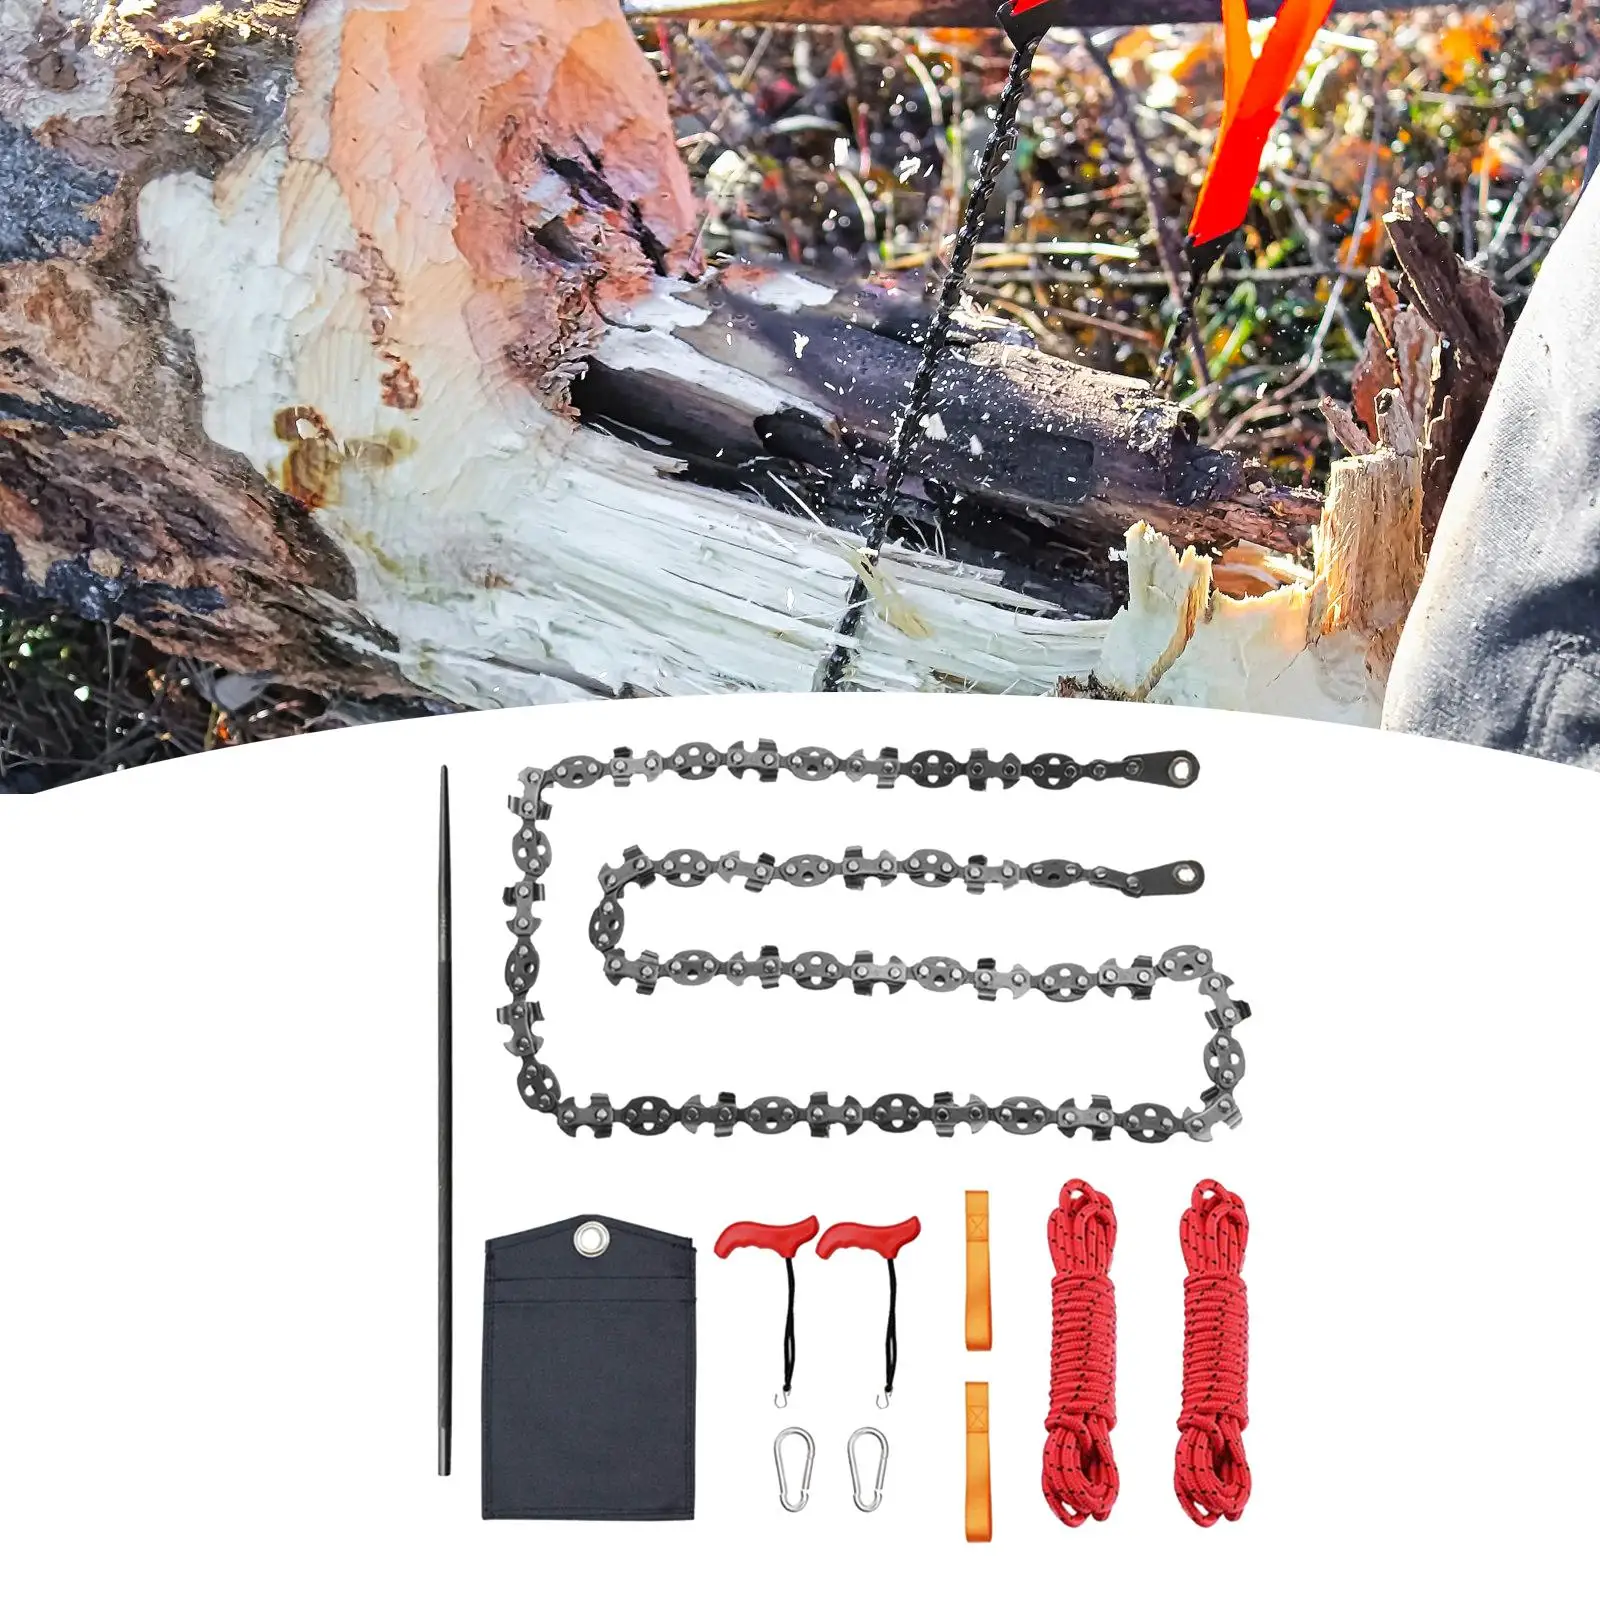 Pocket Saw Survival Gear Heavy Duty Hand Rope Chain Saw Wood Cutting for Backpacking Outdoor Fishermen Emergency Gardening